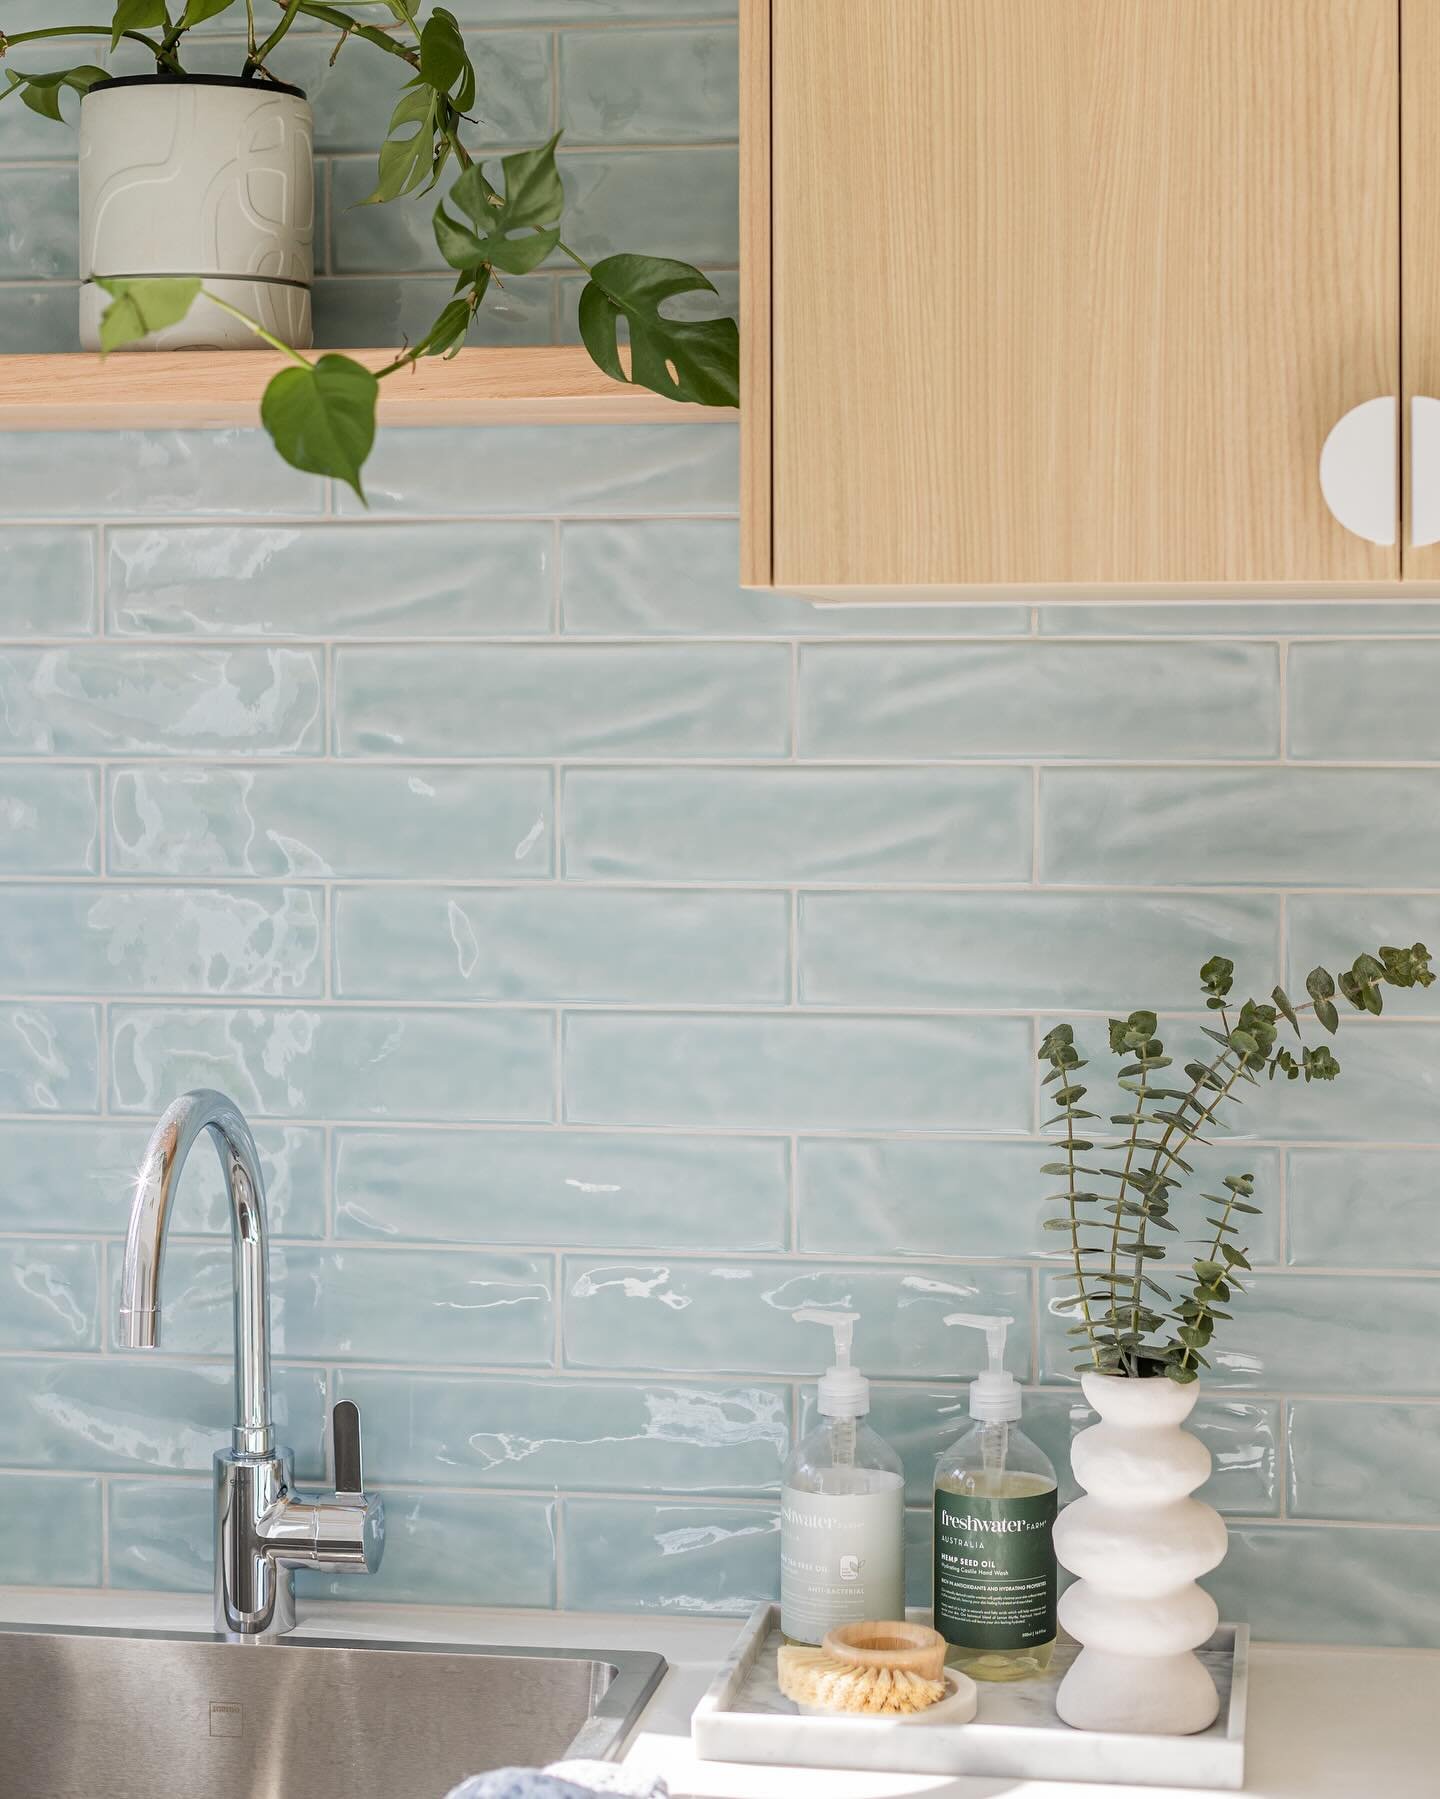 It seems our laundry love was VERY loved. 

Here&rsquo;s some more details about this space. Our brief was: coastal &amp; fun. So we used a pop of bright coastal teal in the tile choice with a classic brick formation pattern to tie in with the client